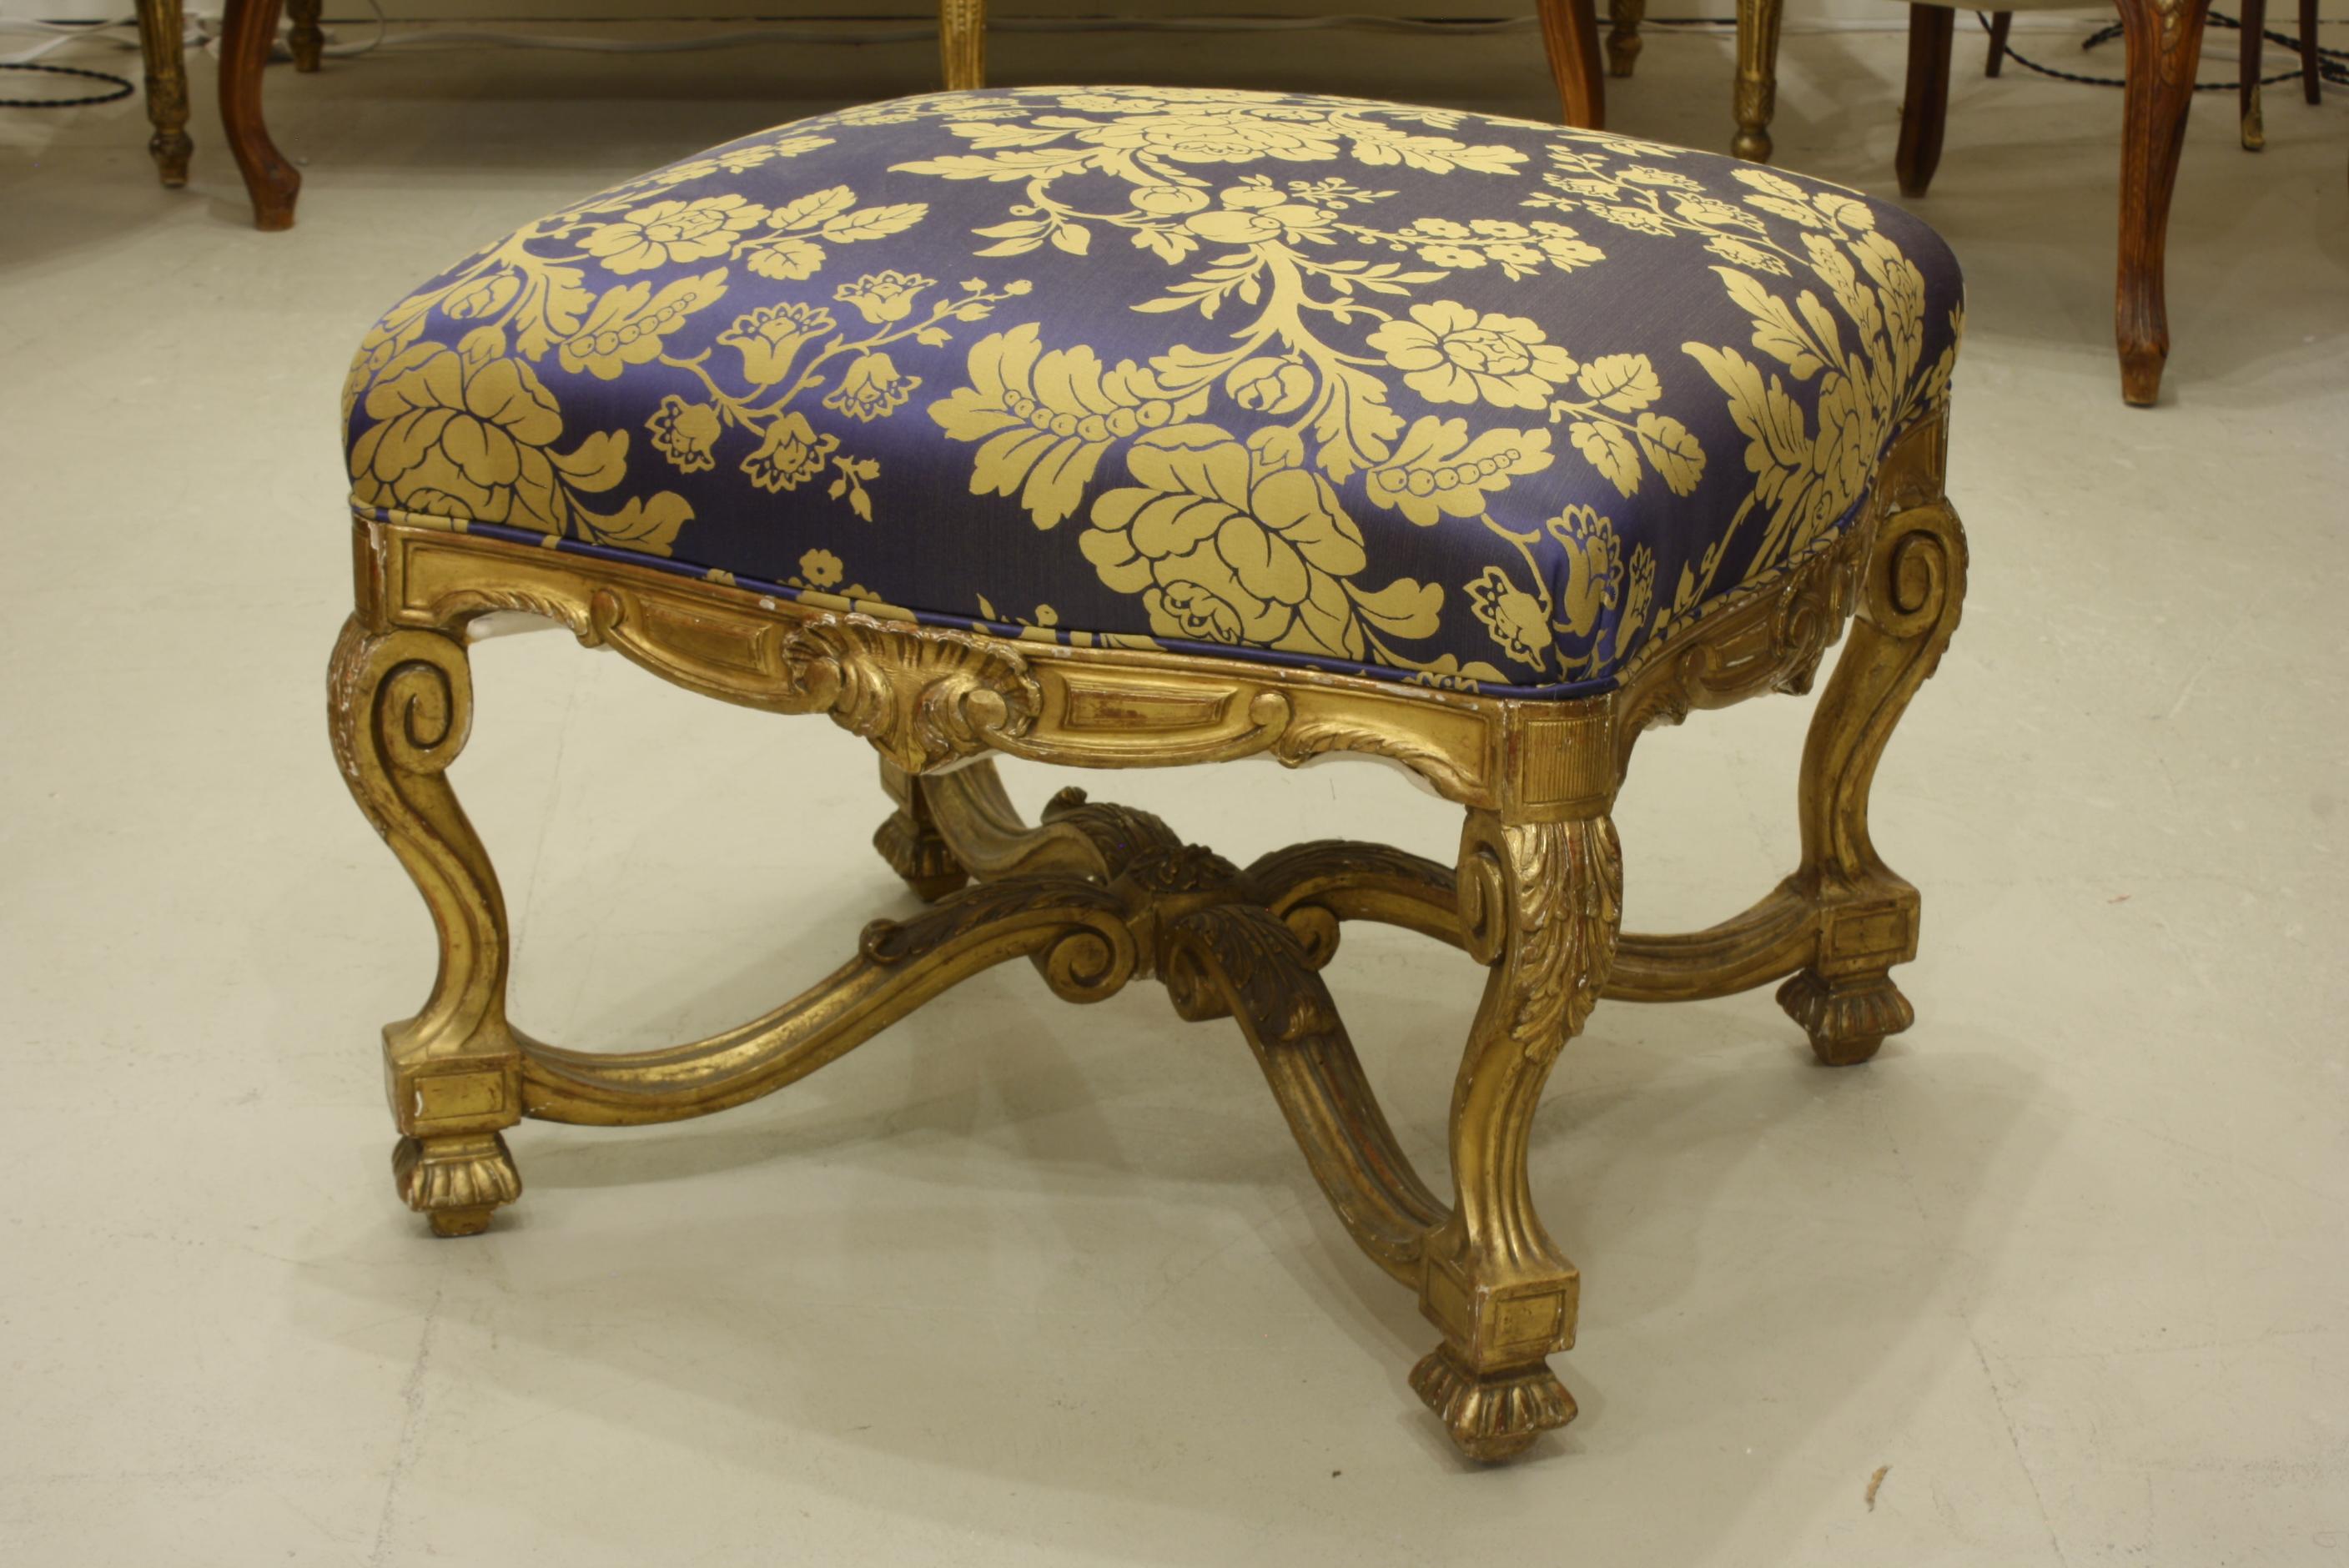 19th Century French Regence Style Carved Giltwood Stool, Tabouret or Ottoman